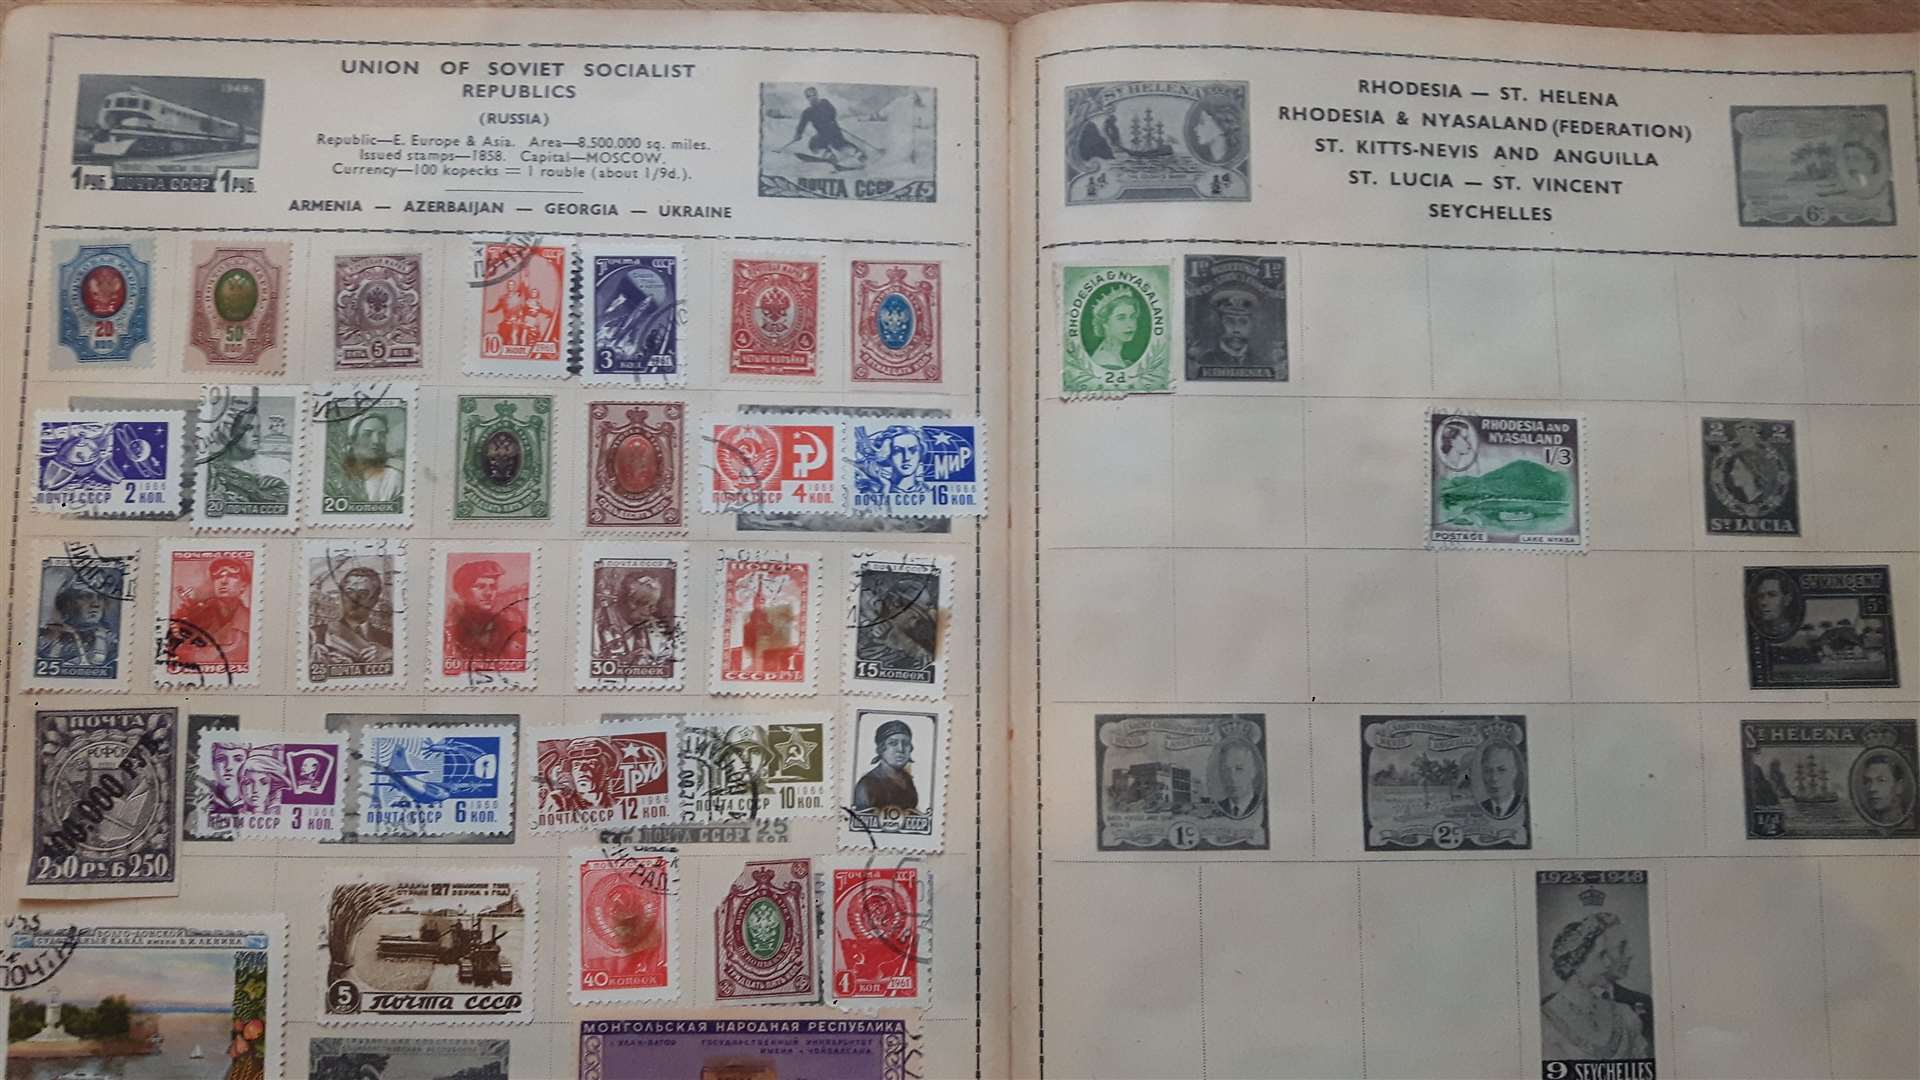 The USSR and Rhodesia pages